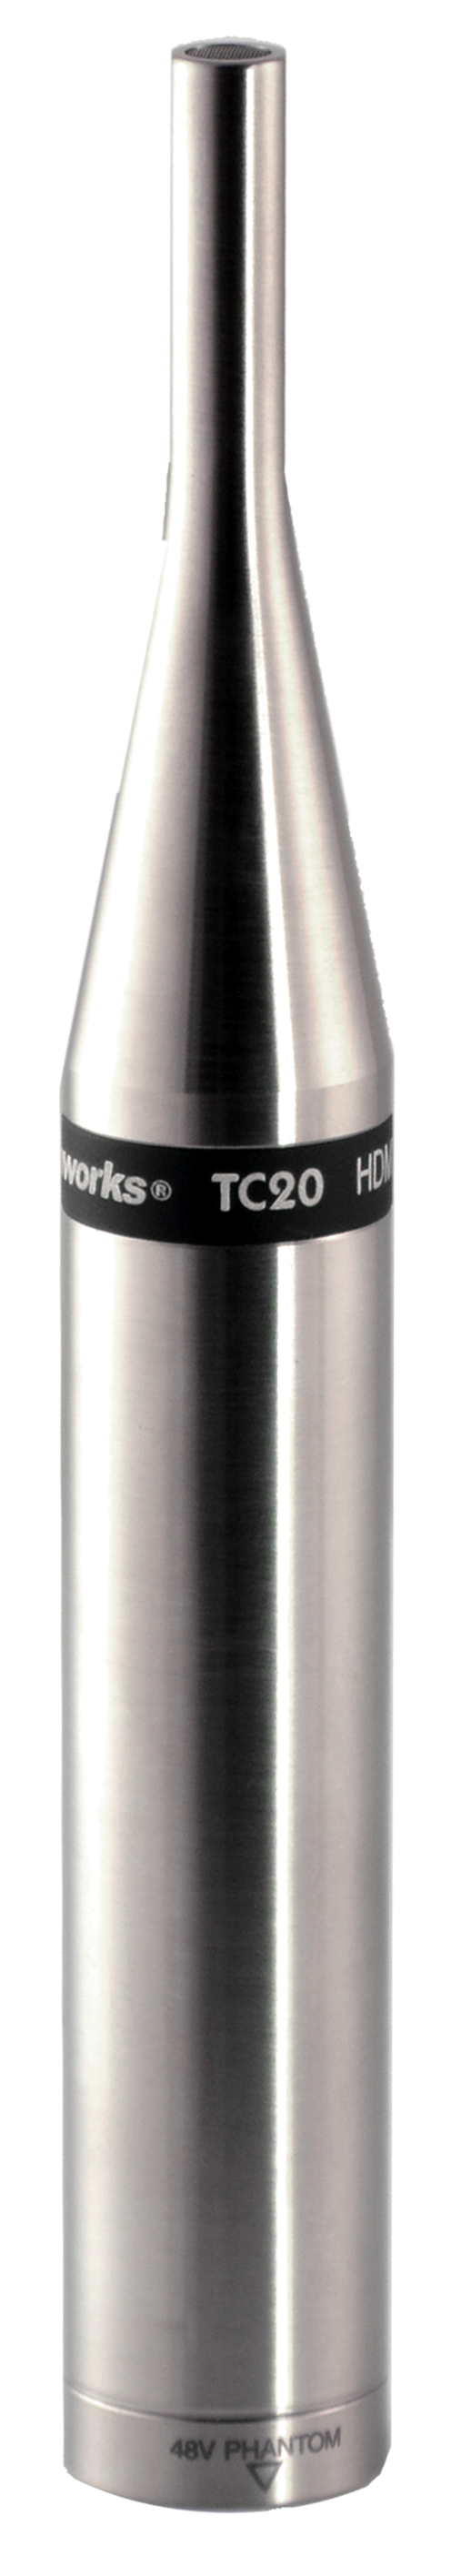 Earthworks TC20mp Time Coherent Series 20kHz Omni Mic for Loud Sources, Matched Pair